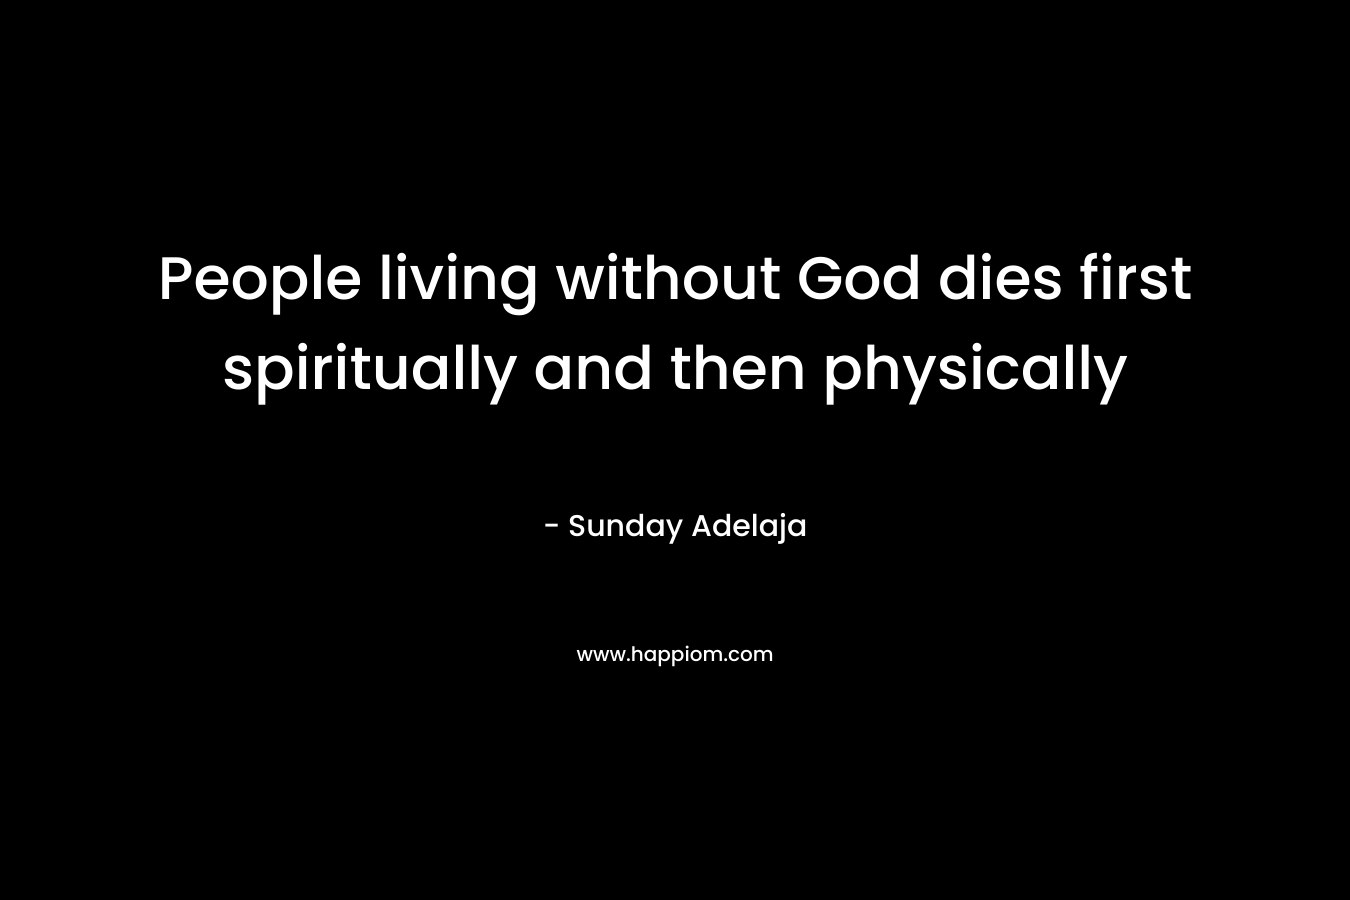 People living without God dies first spiritually and then physically